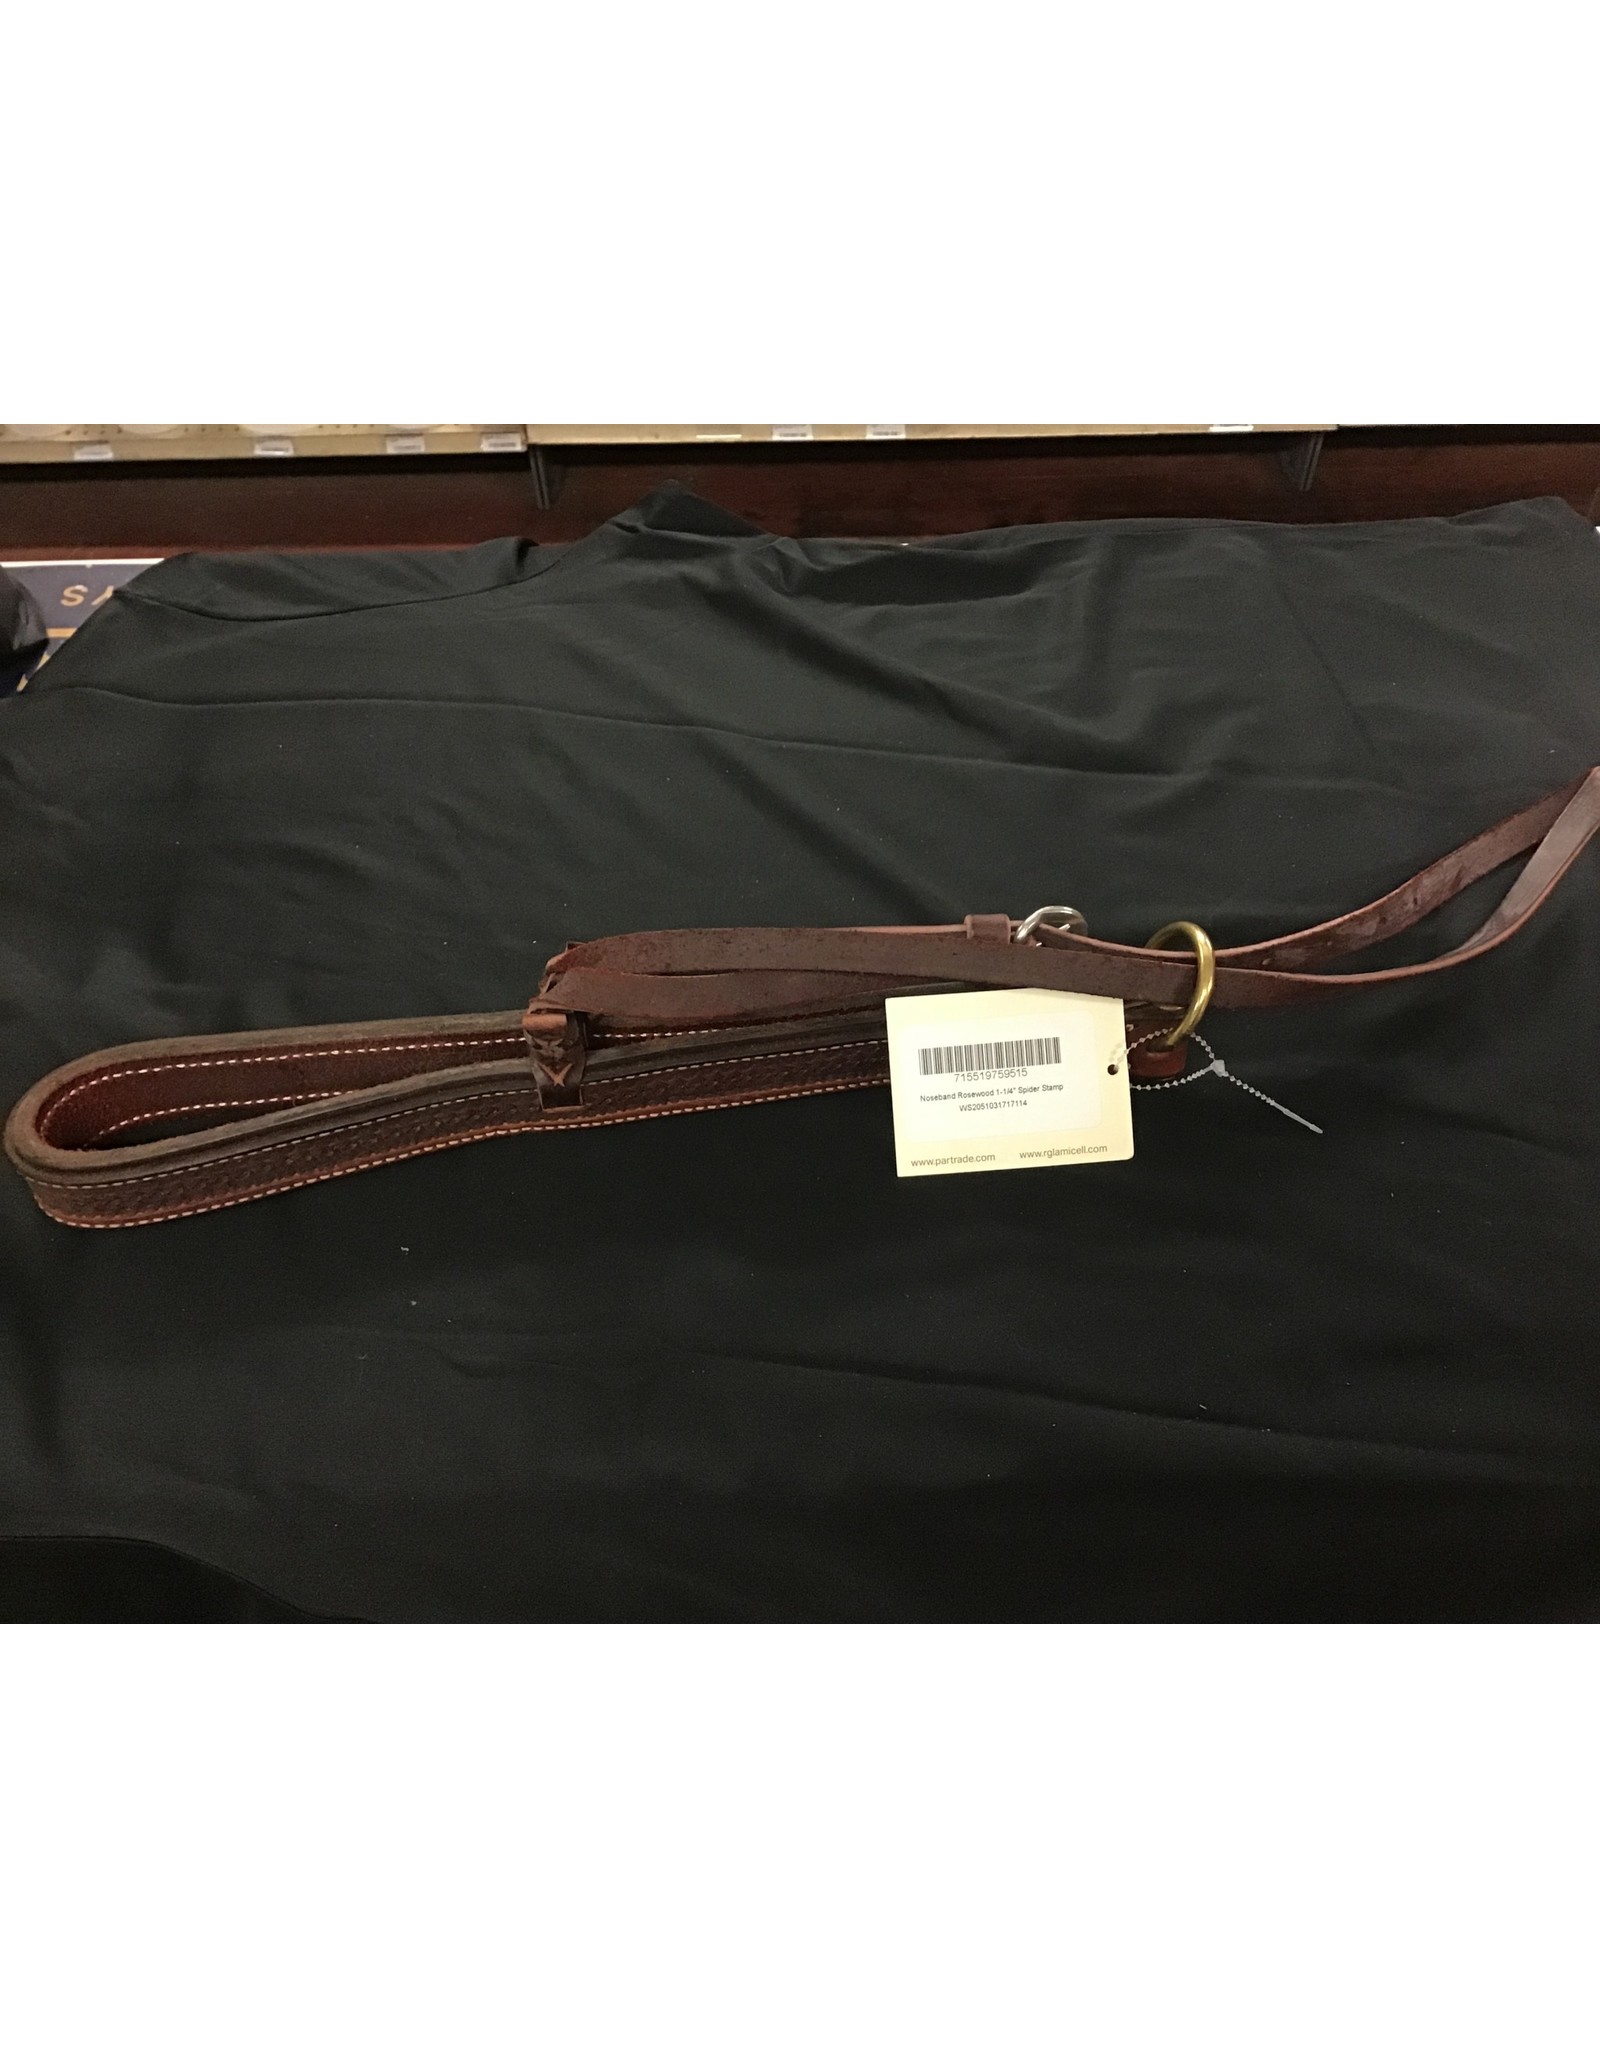 Partrade Noseband, Rosewood Spider Leather